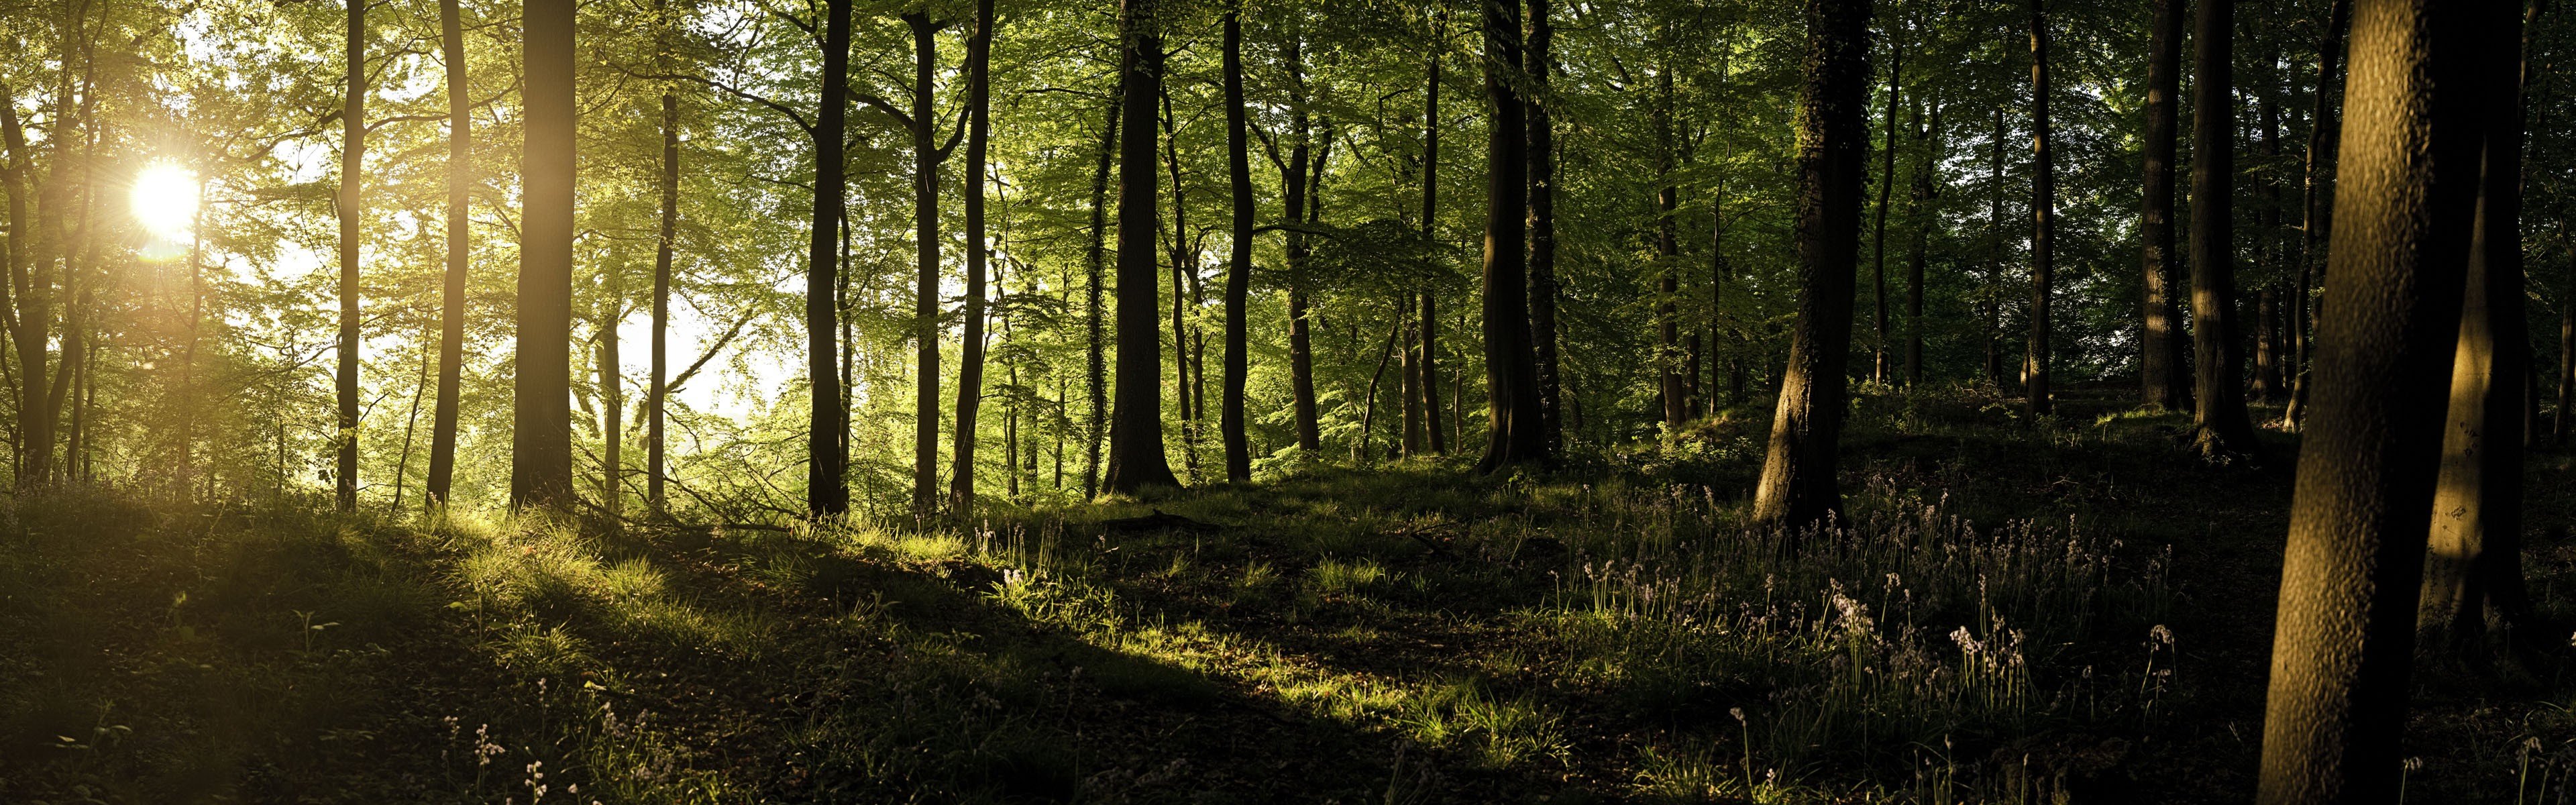 trees, England, Forests, Sunlight, United, Kingdom, Panorama Wallpaper